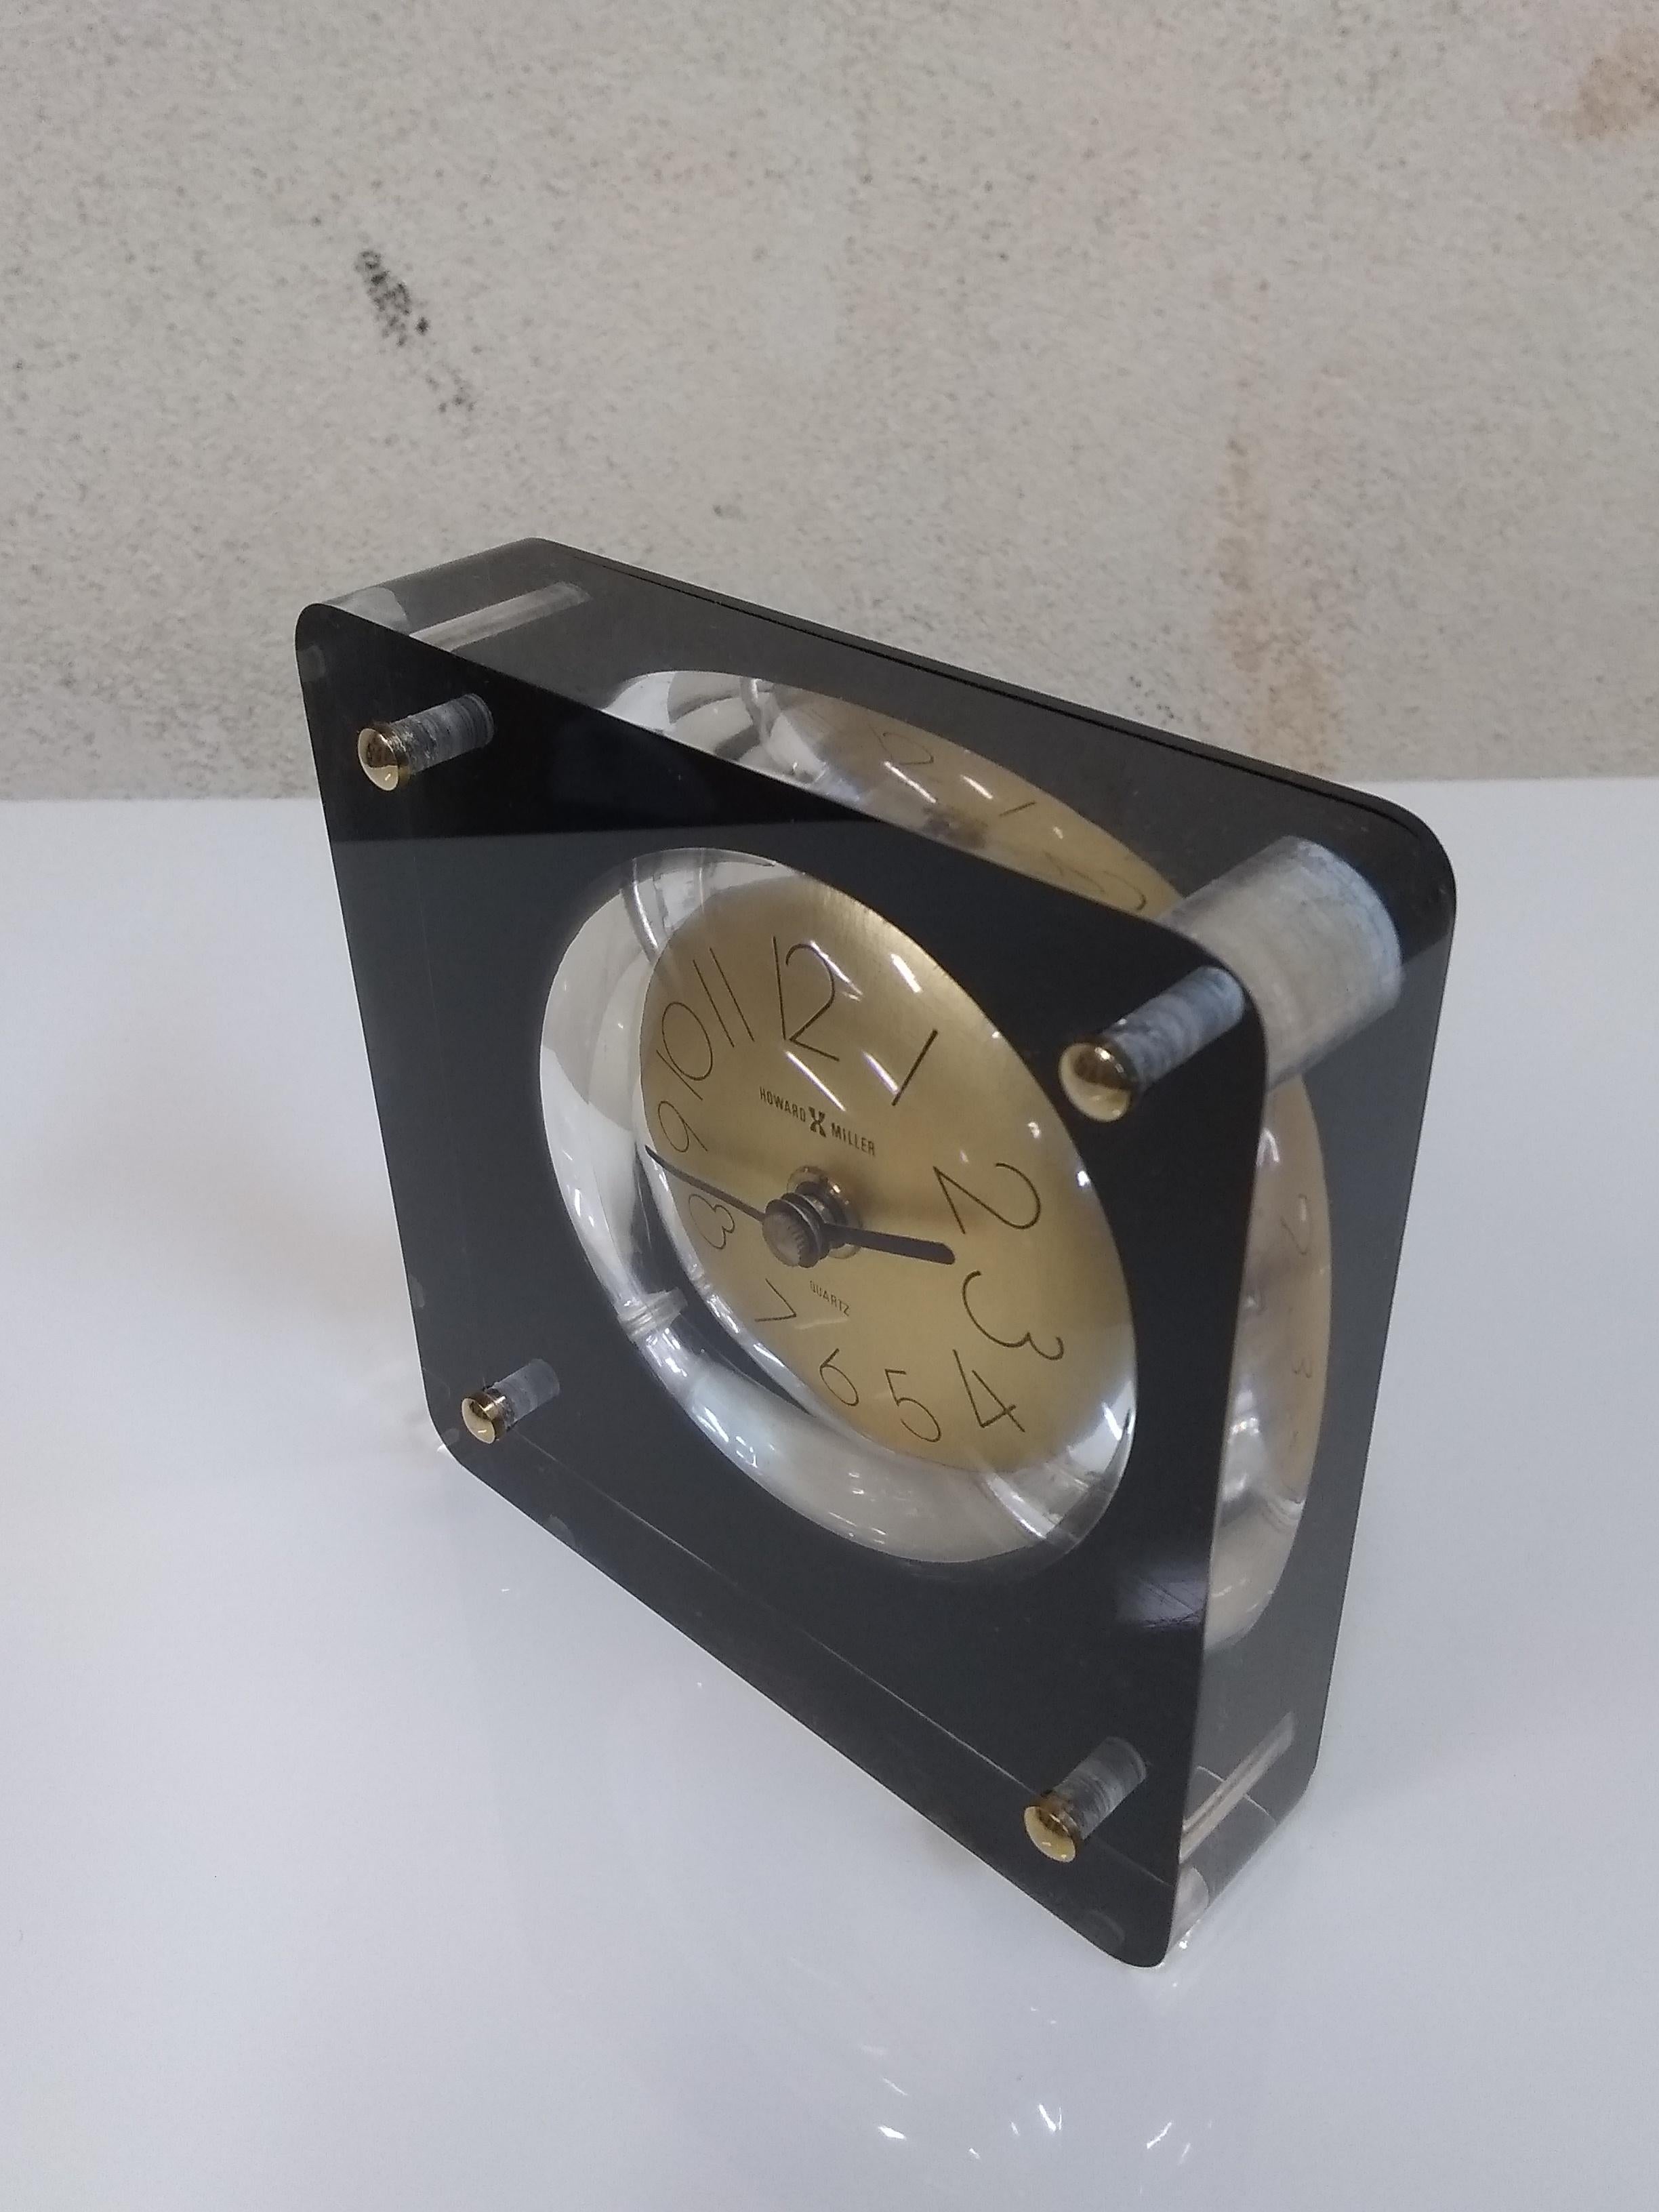 Simple modernist table clock constructed from a block of one inch thick Lucite, the round gold tone face and quartz movement appear to float within the black Lucite frame and four polished chrome dowels. Measure: 4.5 inches square with slim modern